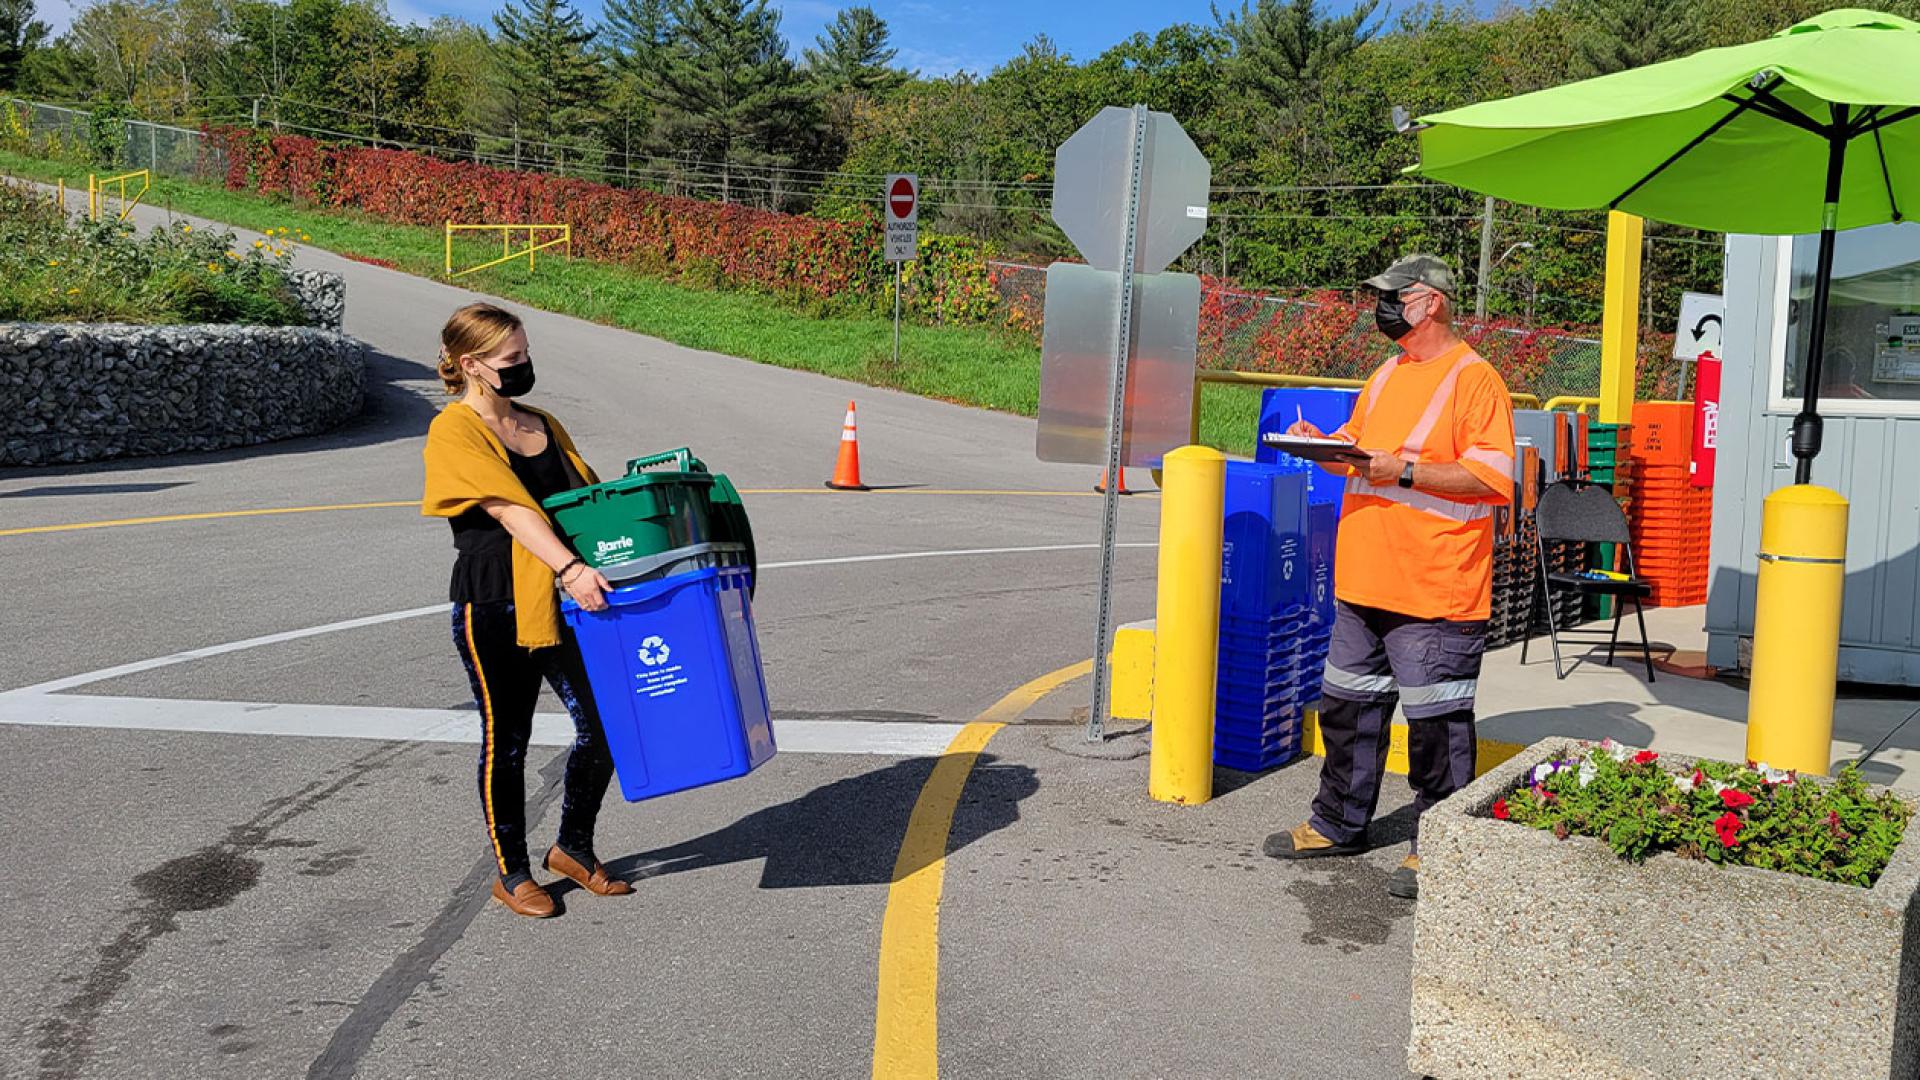 Recycling boxes and green bins are available for pickup at the Recycling Depot.